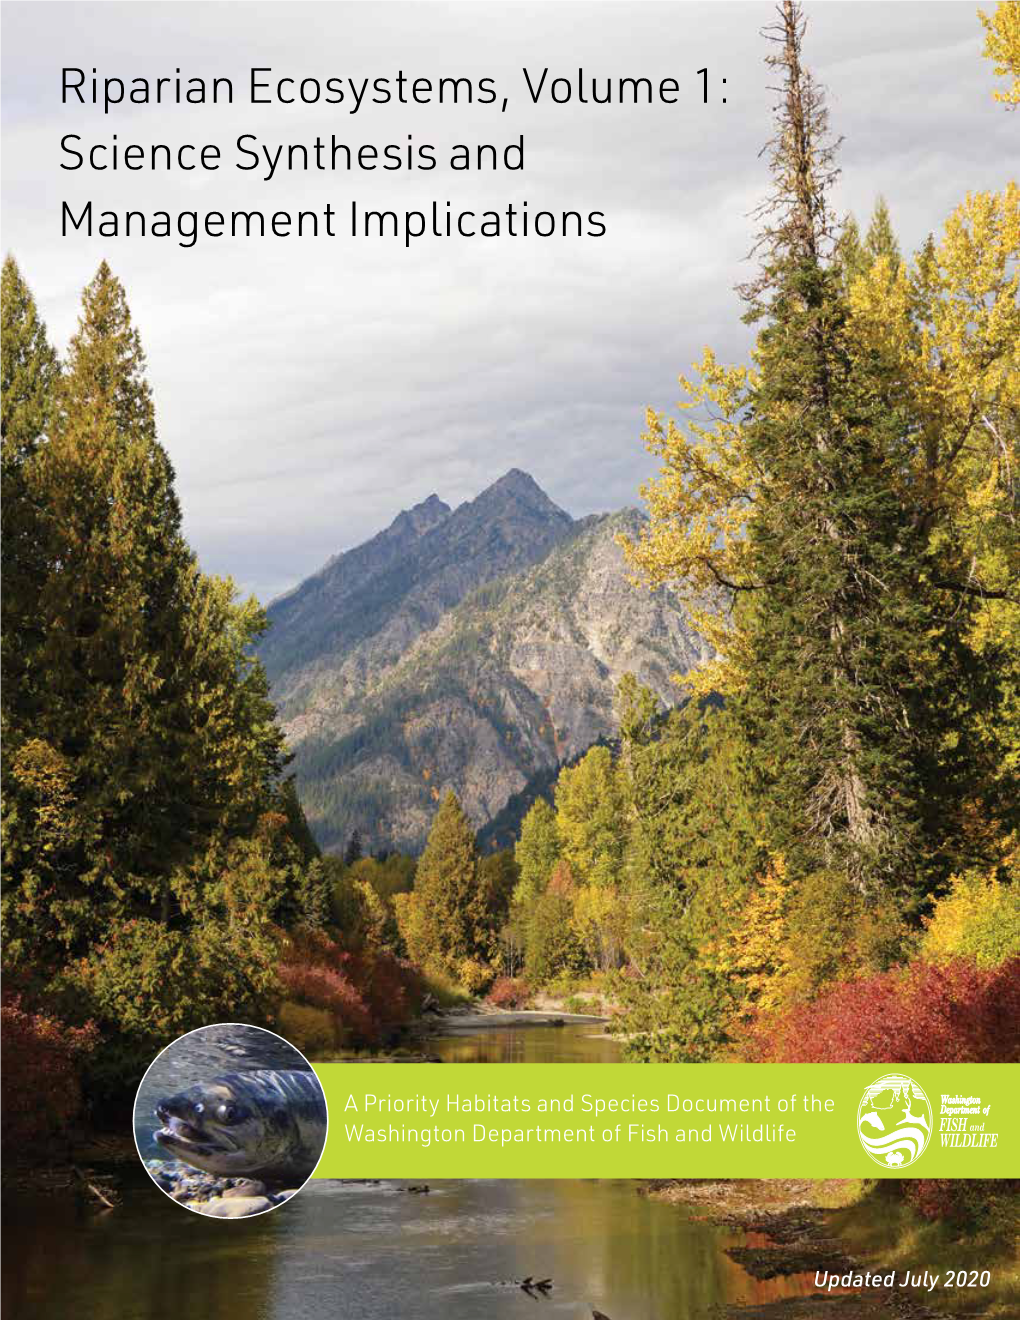 Riparian Ecosystems, Volume 1: Science Synthesis and Management Implications